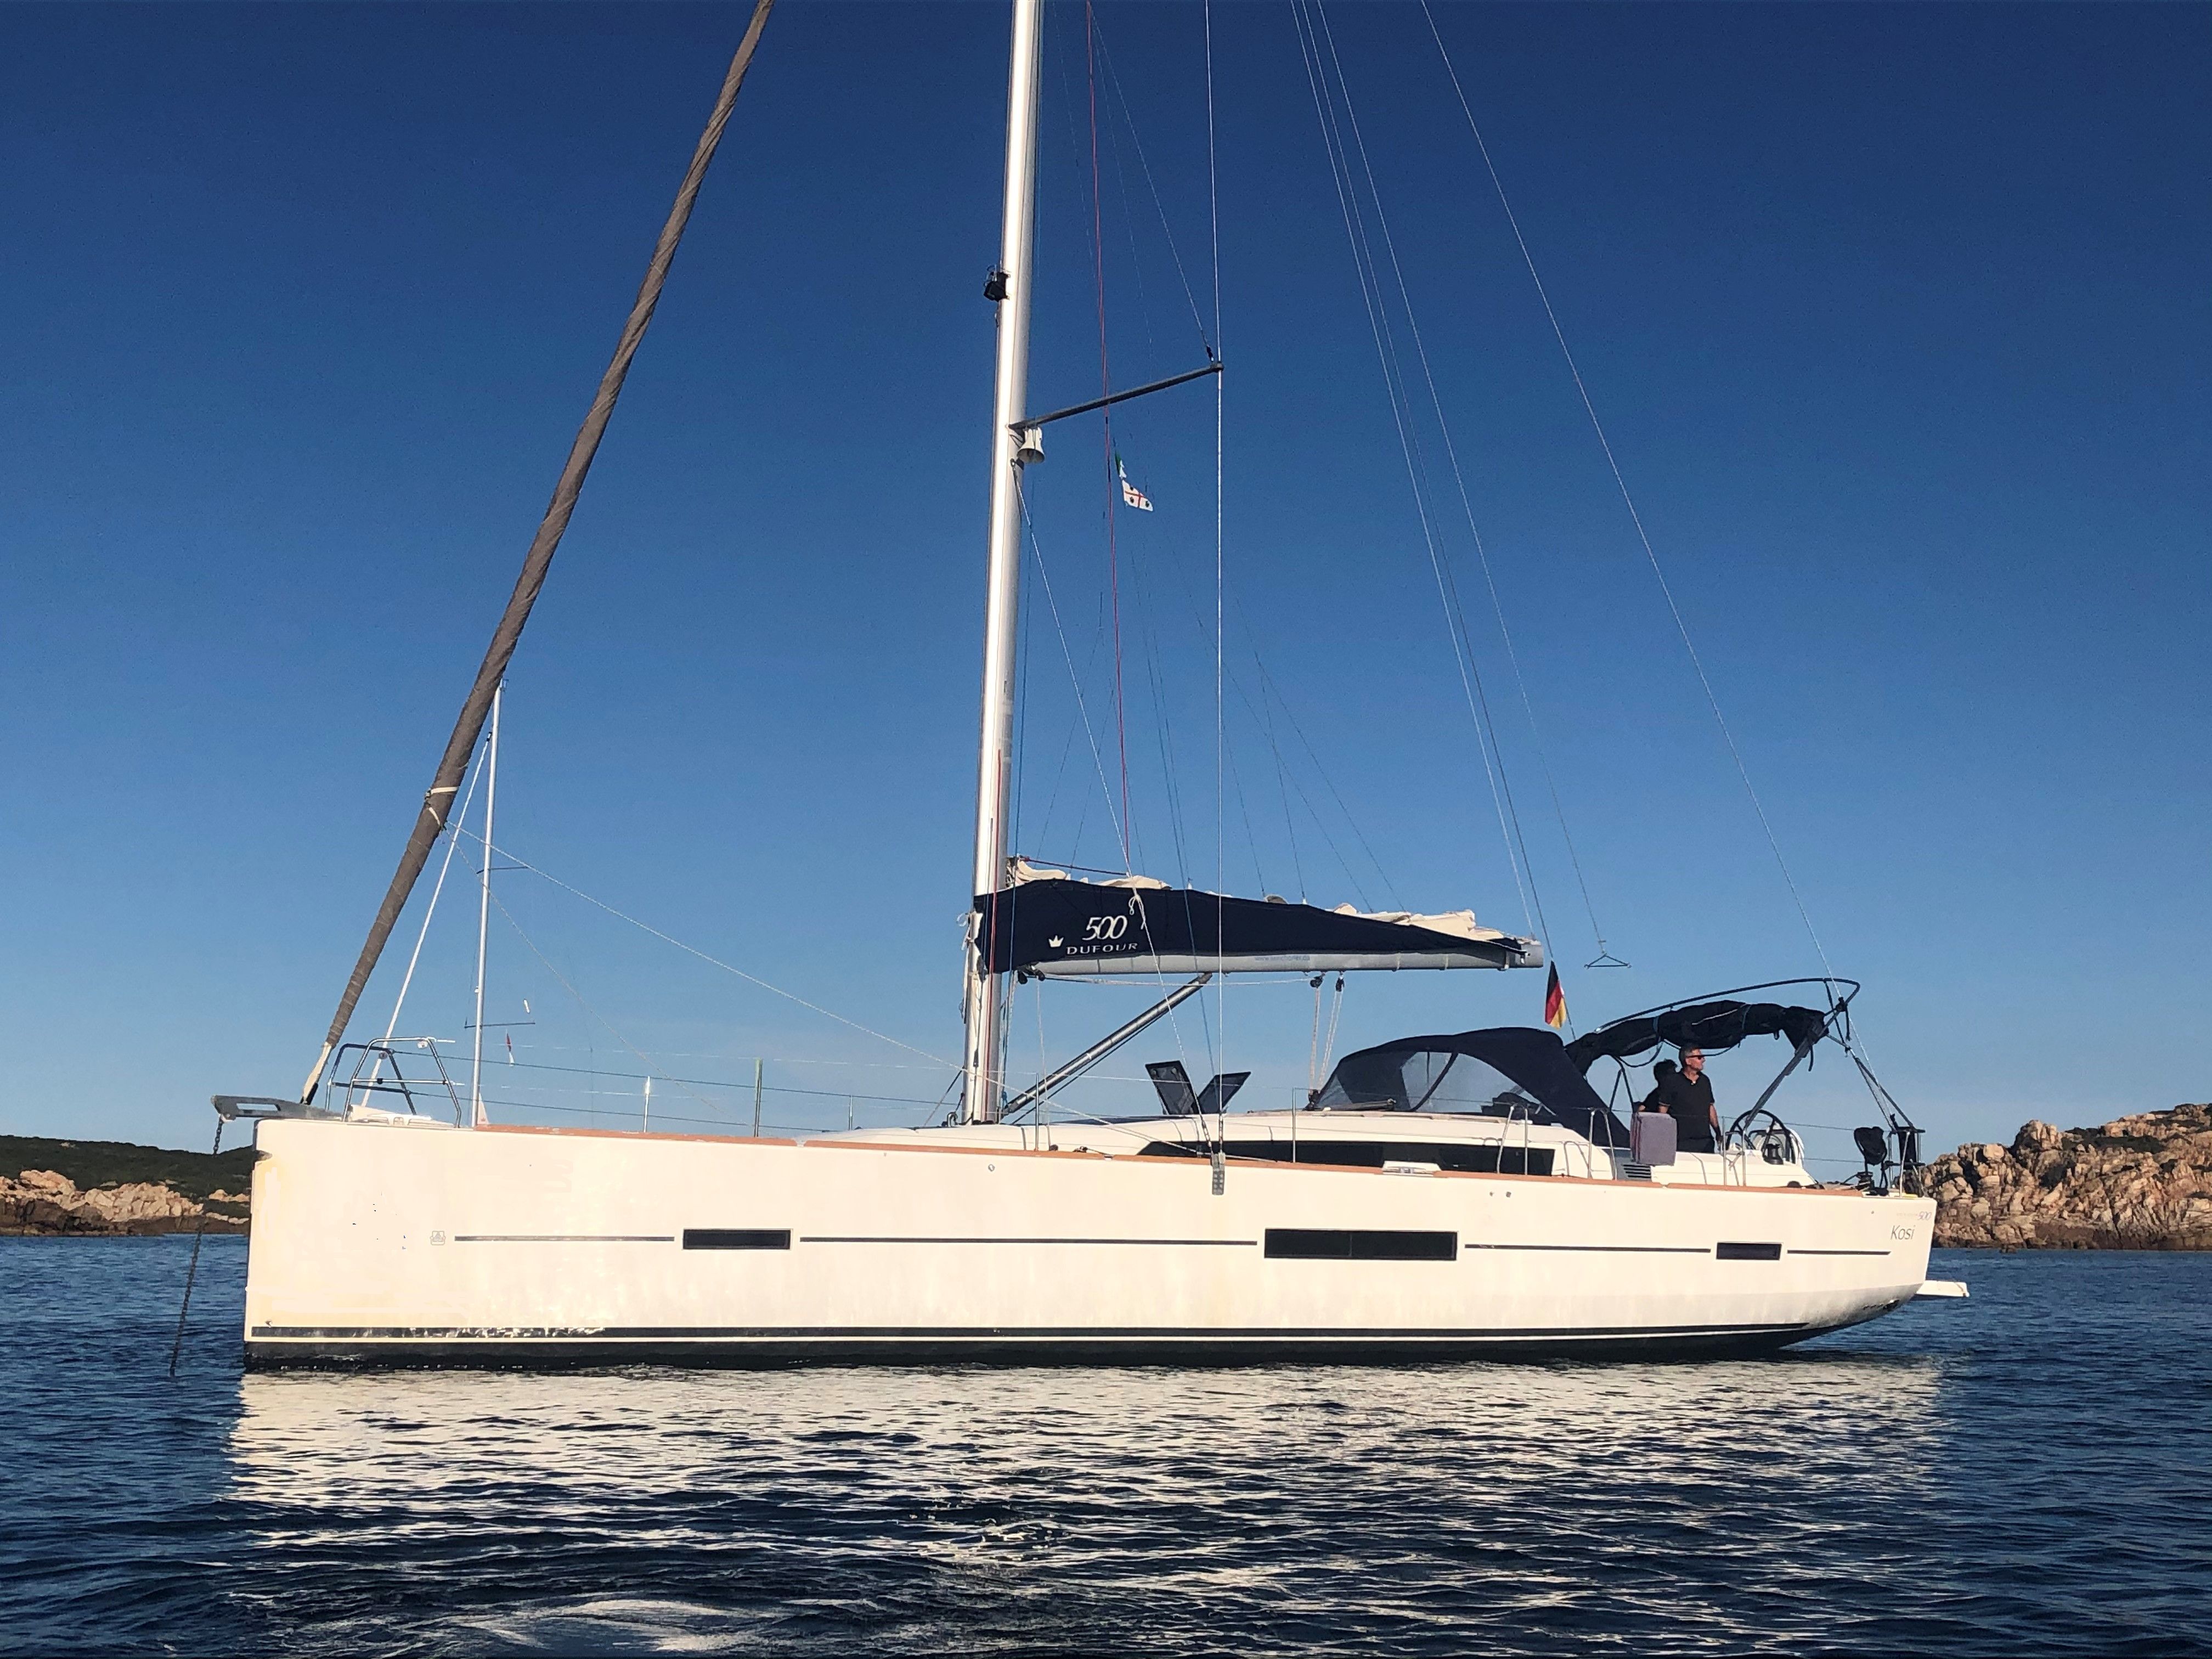 Dufour 500 Grand Large - Yacht Charter San Vincenzo & Boat hire in Italy San Vincenzo Marina di San Vincenzo 1